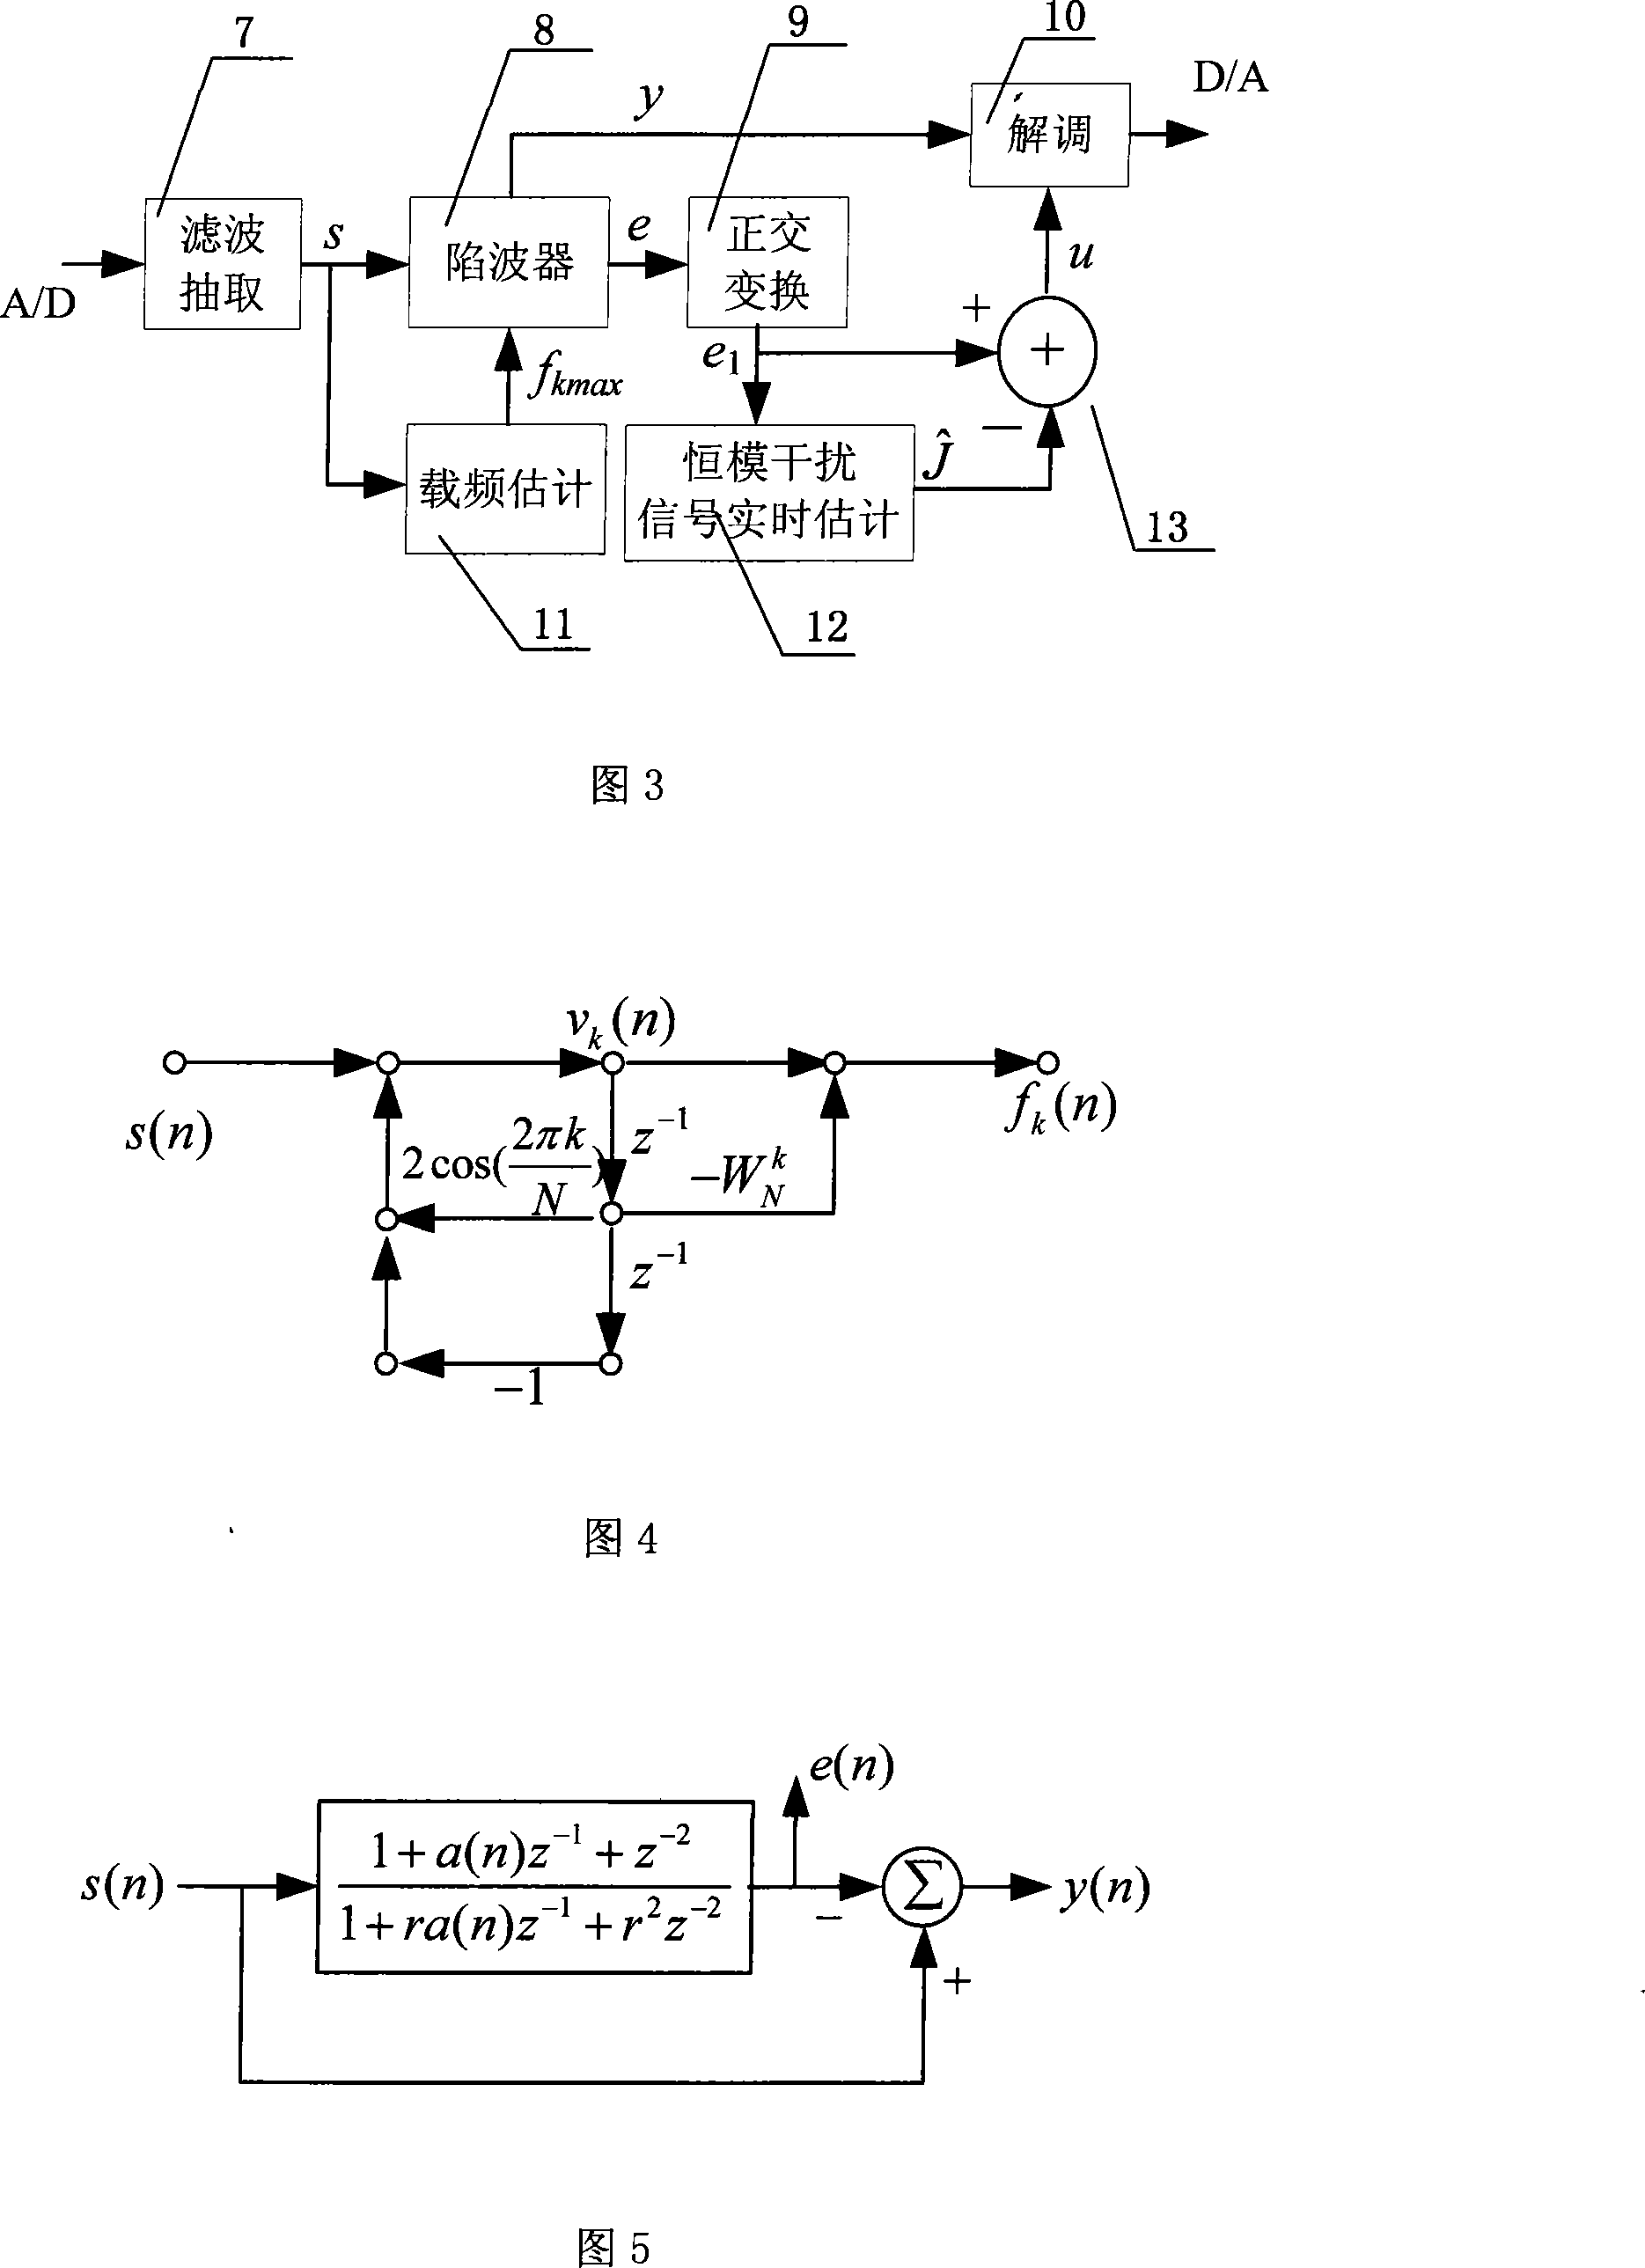 Single channel optimum constant-mould interference rejection method and system in civil aviation air-ground communication